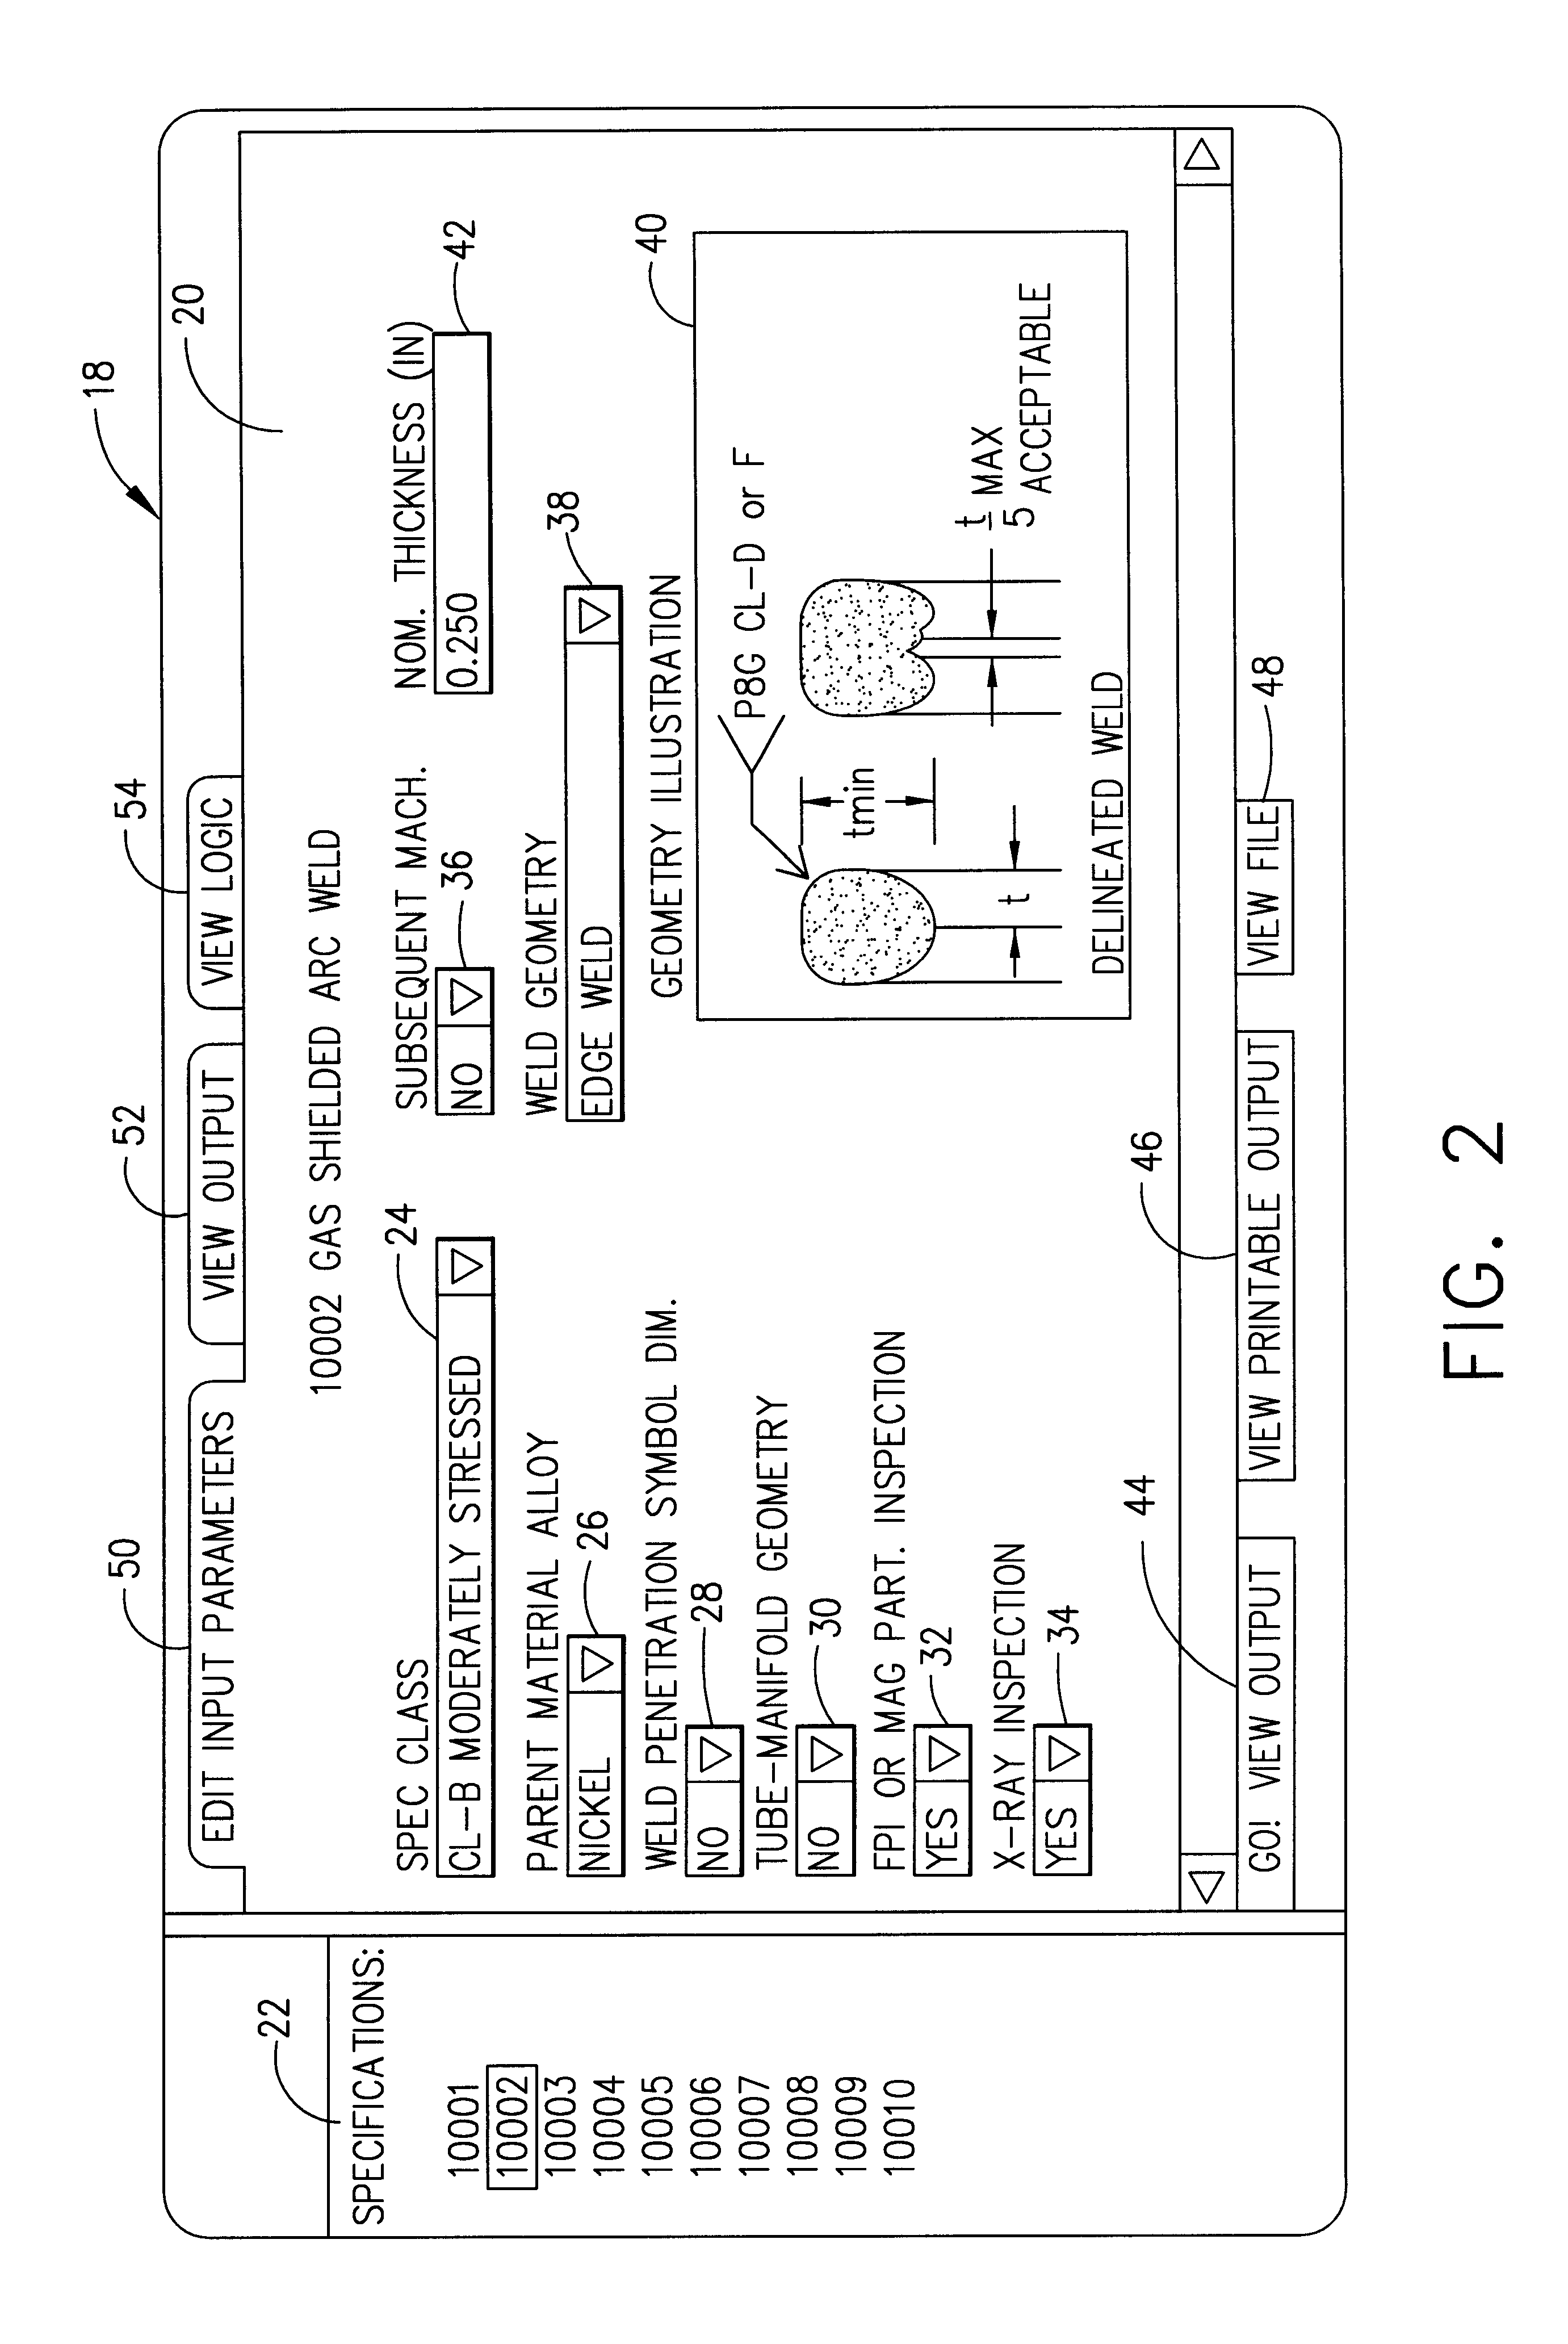 System and method for determining specific requirements from general requirements documents